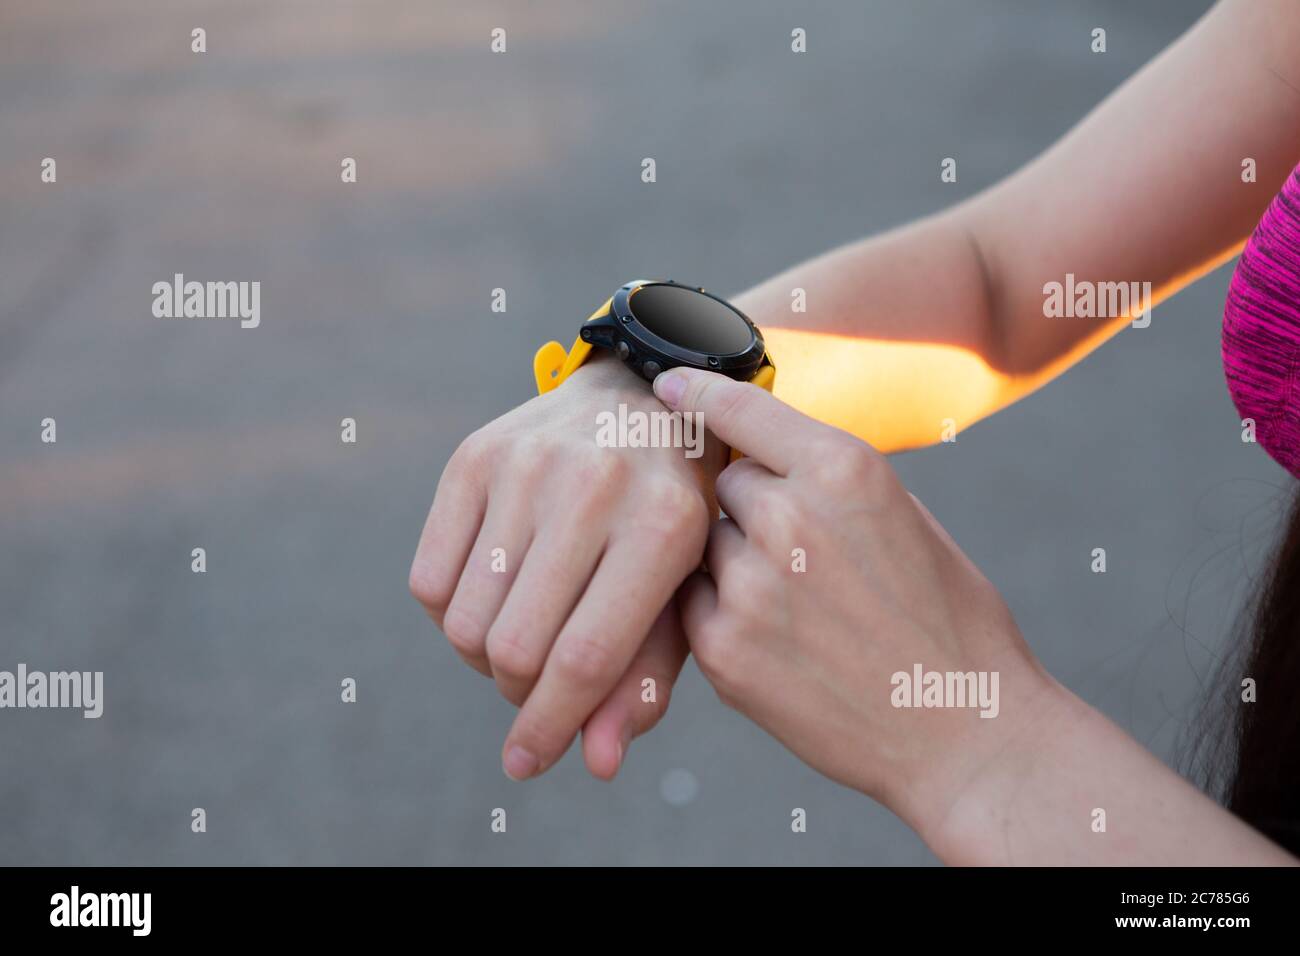 Closeup view on hand of woman and fitness health tracker wearable watch Stock Photo